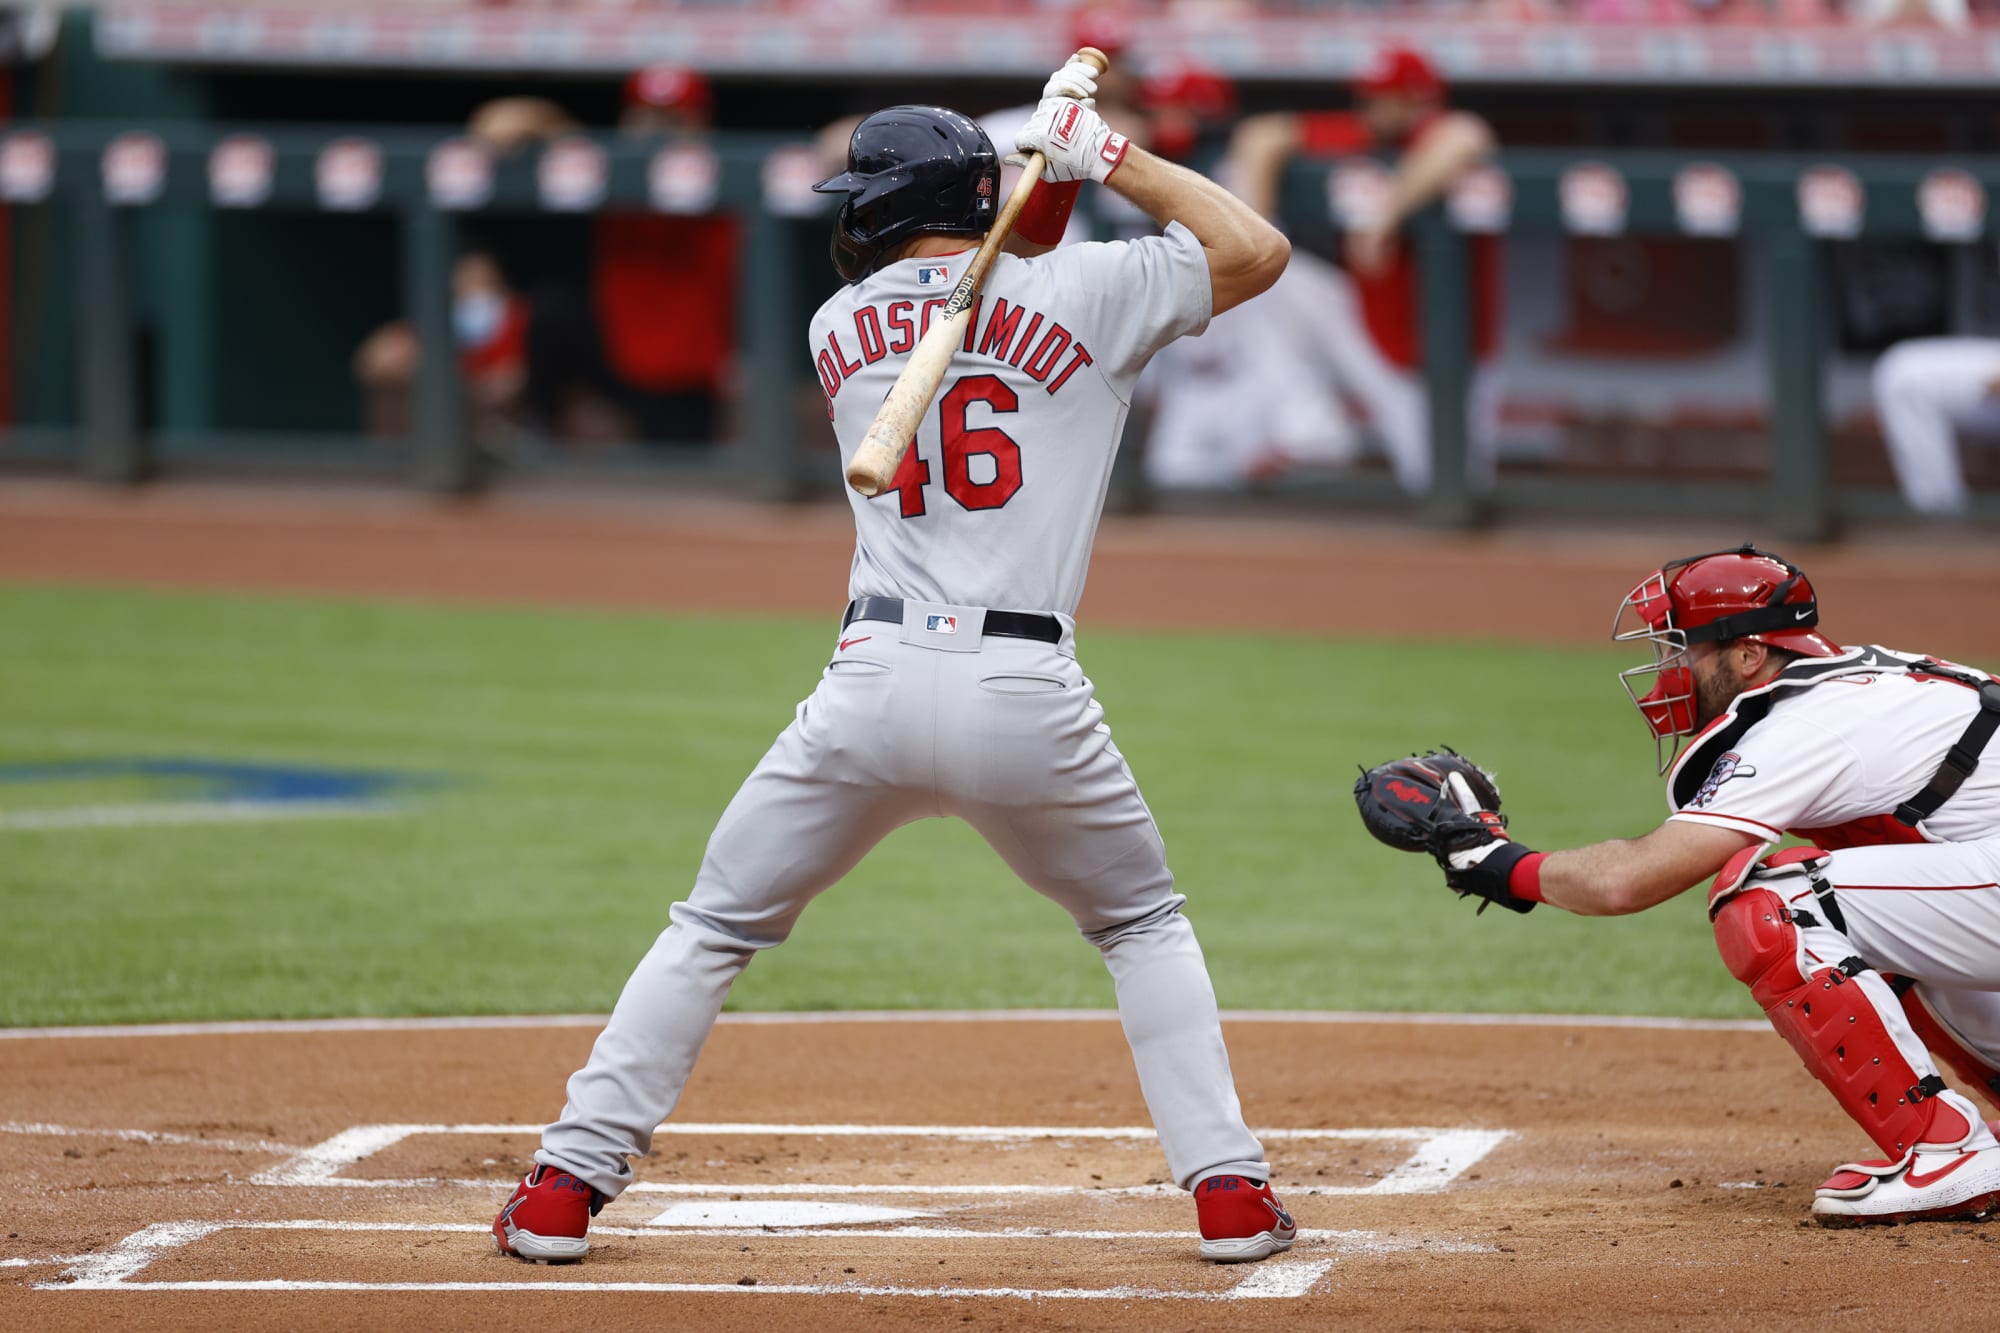 St. Louis Cardinals: This weekend could be the final straw for the Reds